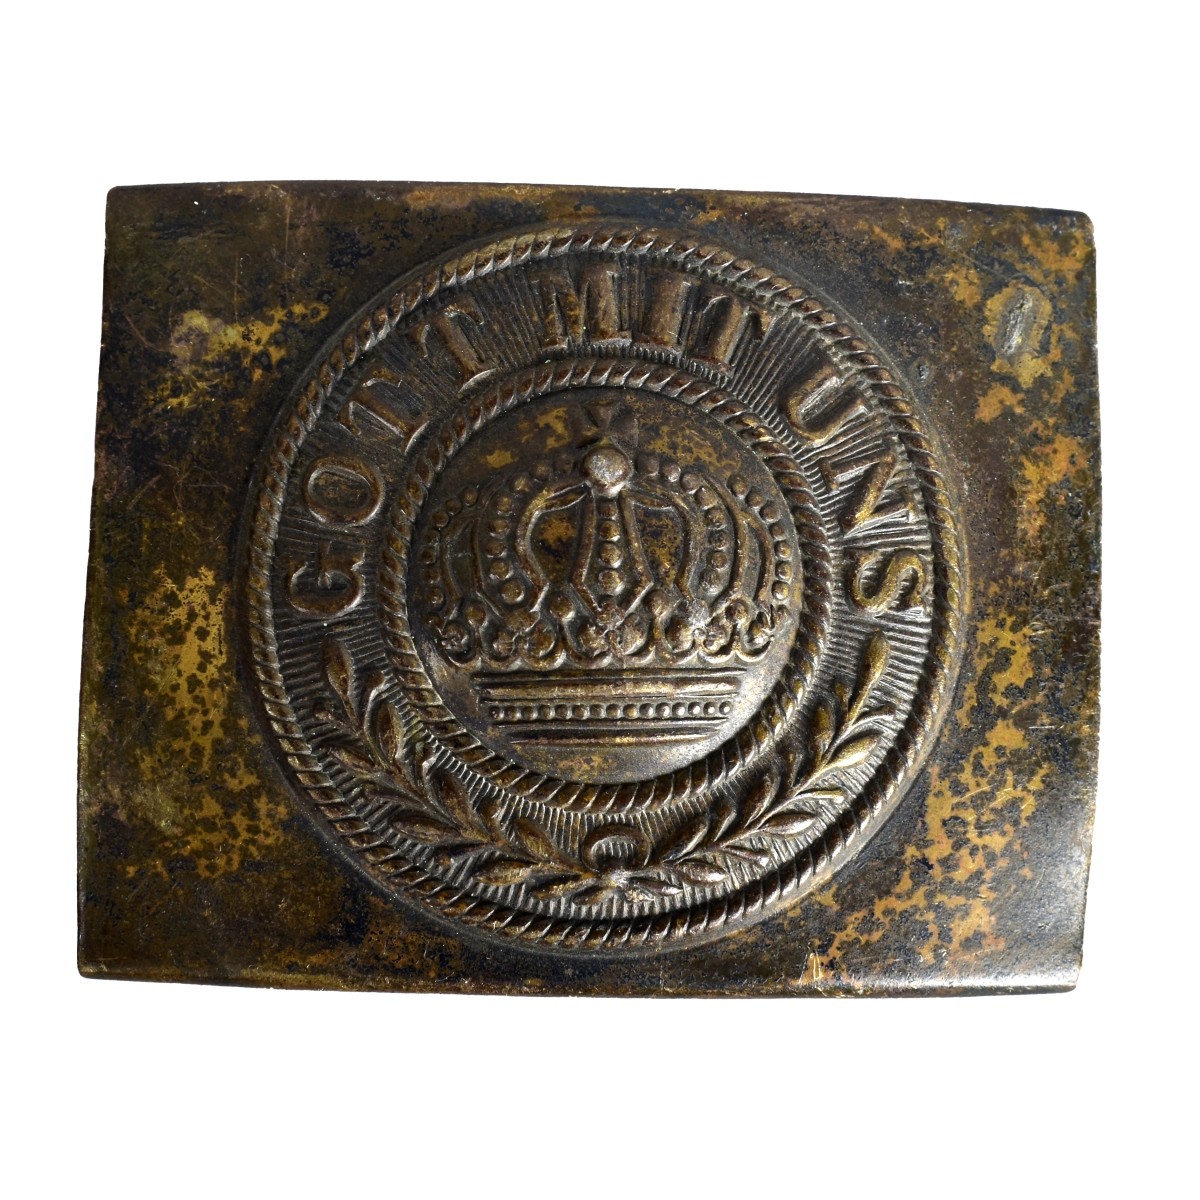 Military Belt Buckles and Metal